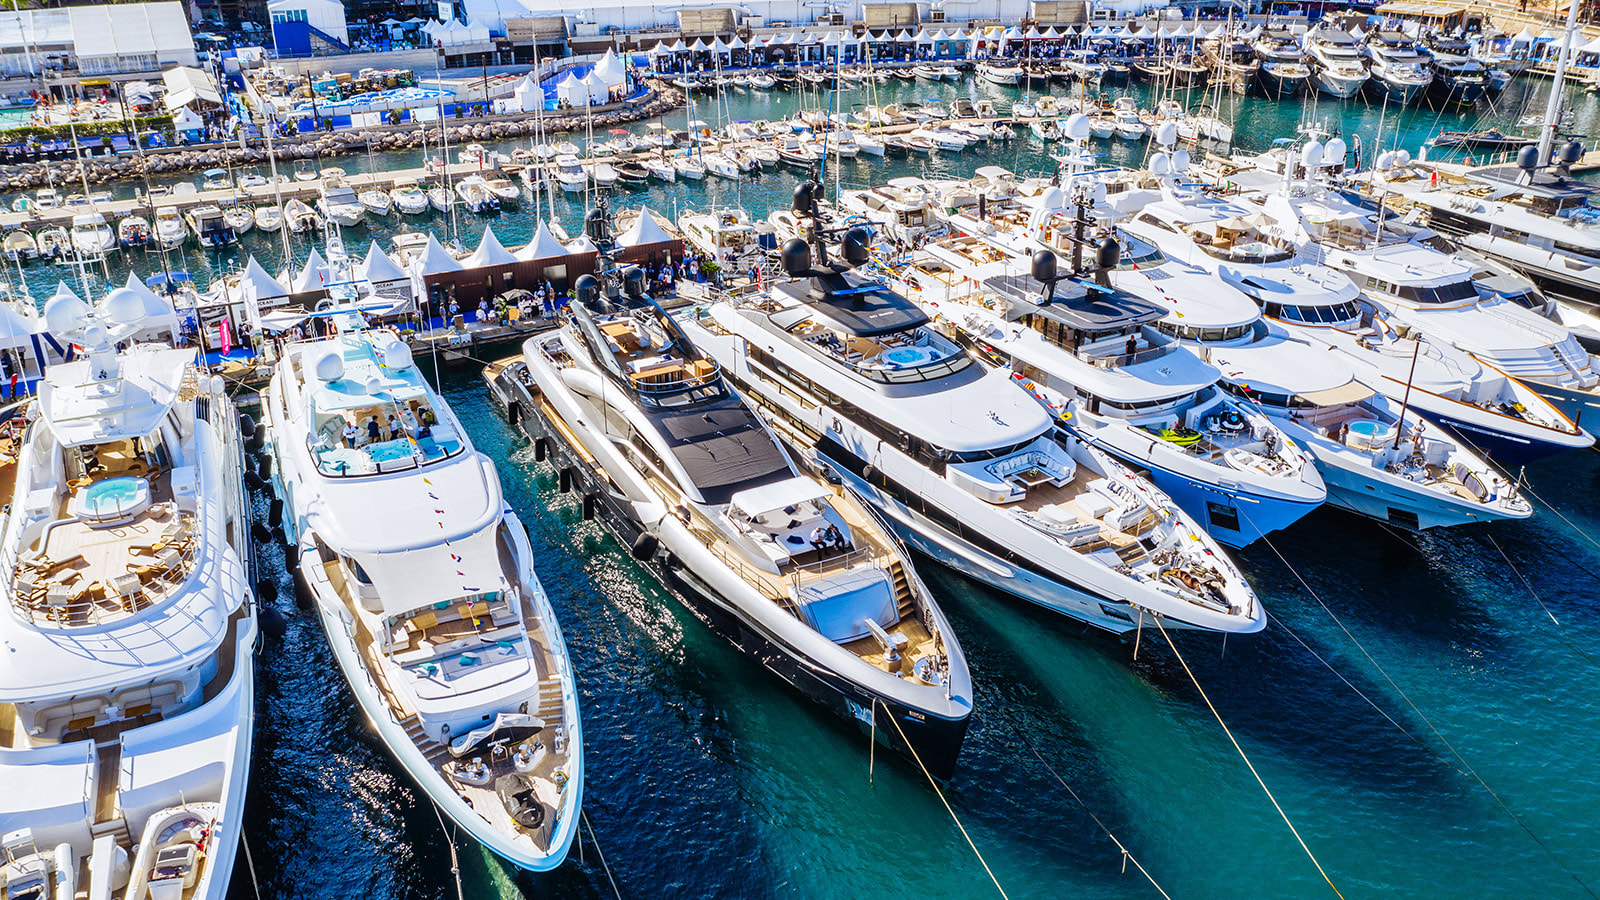 Monaco Yacht Show 2021 to Introduce the Latest Masterpieces in the Yacht Industry